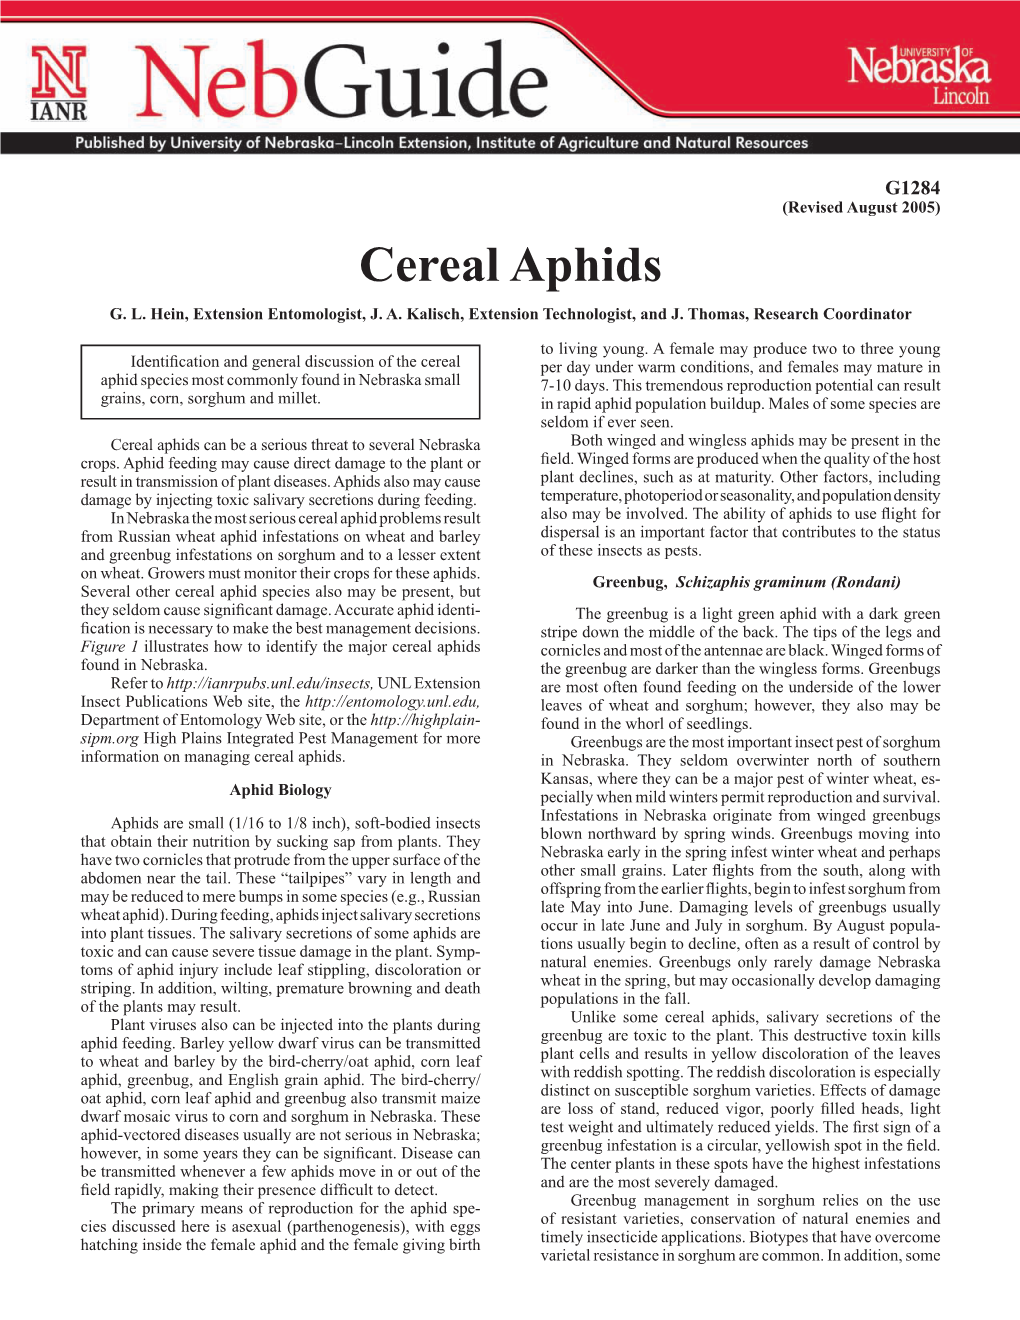 Cereal Aphids G